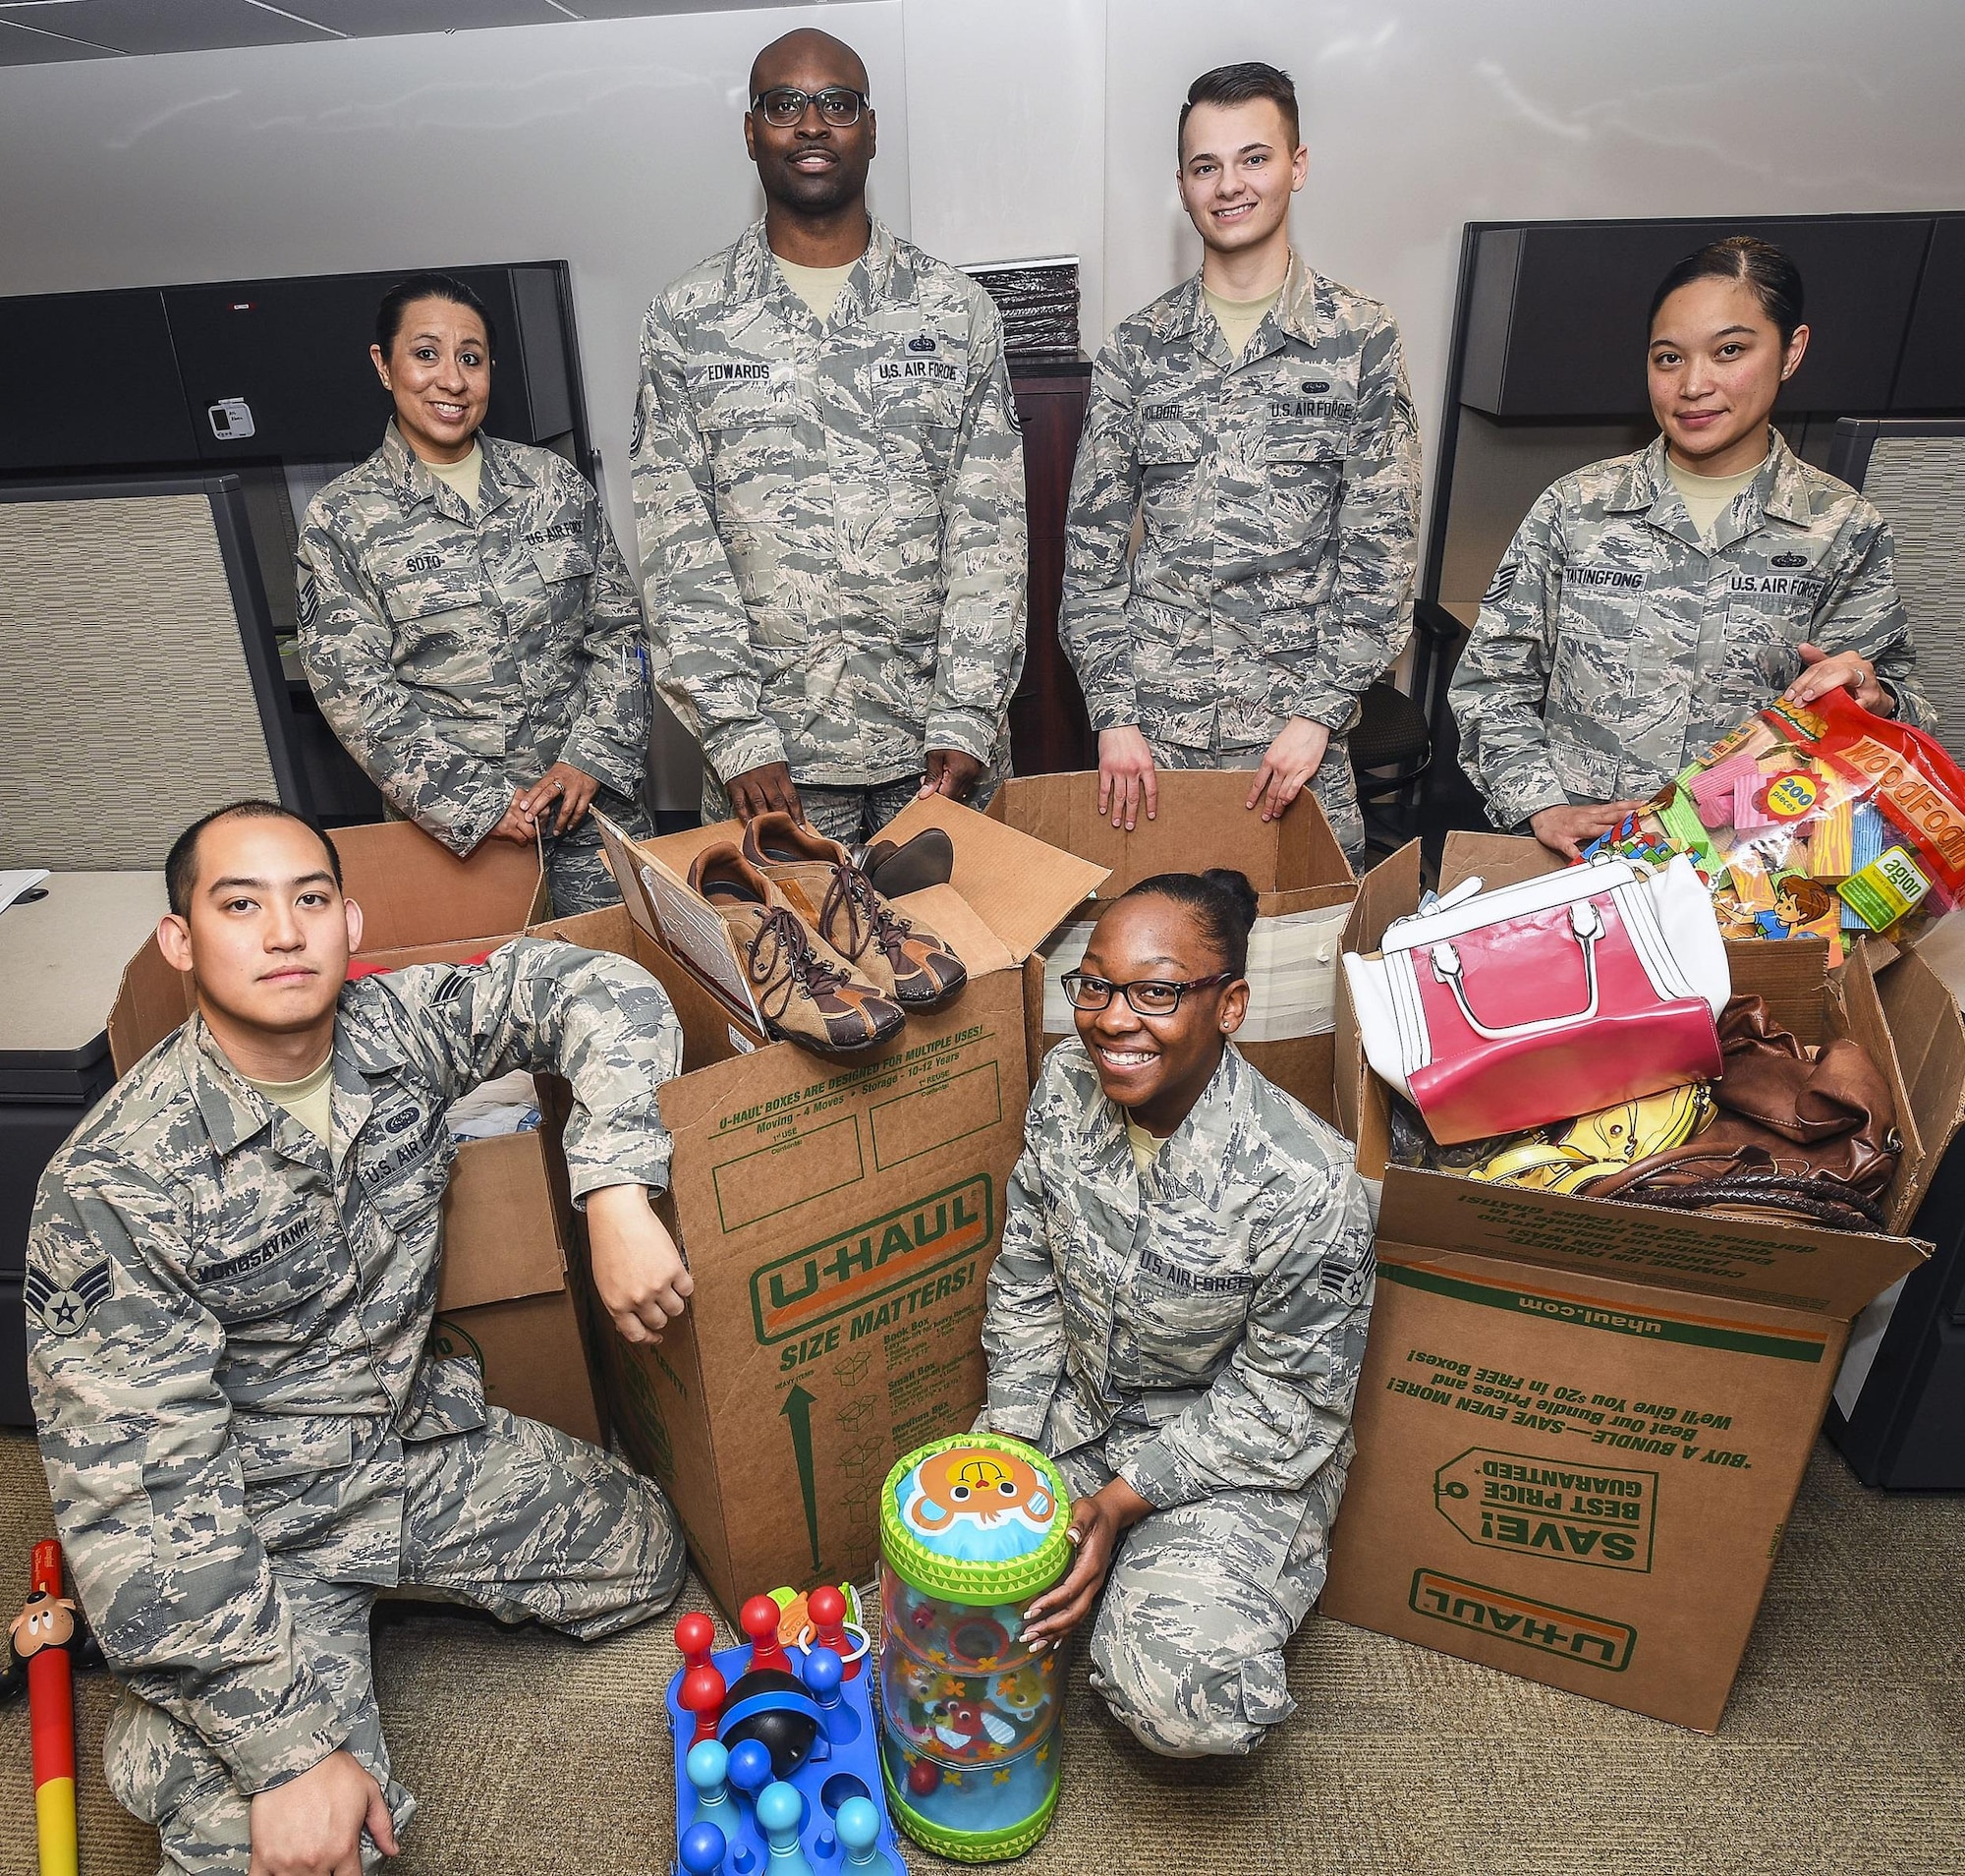 Airmen pose for a photo April 19 at Hill Air Force Base. The Airmen organized a drive to collect cosmetics, clothing, blankets, children’s toys and other items to benefit a local domestic violence shelter. Pictured are: front row, left to right, Senior Airman Matthew Vongsavanh and Senior Airman Taekausha Lomax; back row, left to right, Master Sgt. Vanessa Soto, Tech. Sgt. Gerald Edwards, Airman 1st Class Taylor Holdorf, and Tech. Sgt. Valarie Taitingfong. Not pictured are: Capt. Kristi Newberry, Tech. Sgt. Mary Mines, Senior Airman Fabian Ferretti, Senior Airman Douglas Crisp, Airman 1st Class Ian Padilla and Airman 1st Class Gavin Rucker. (U.S. Air Force photo)